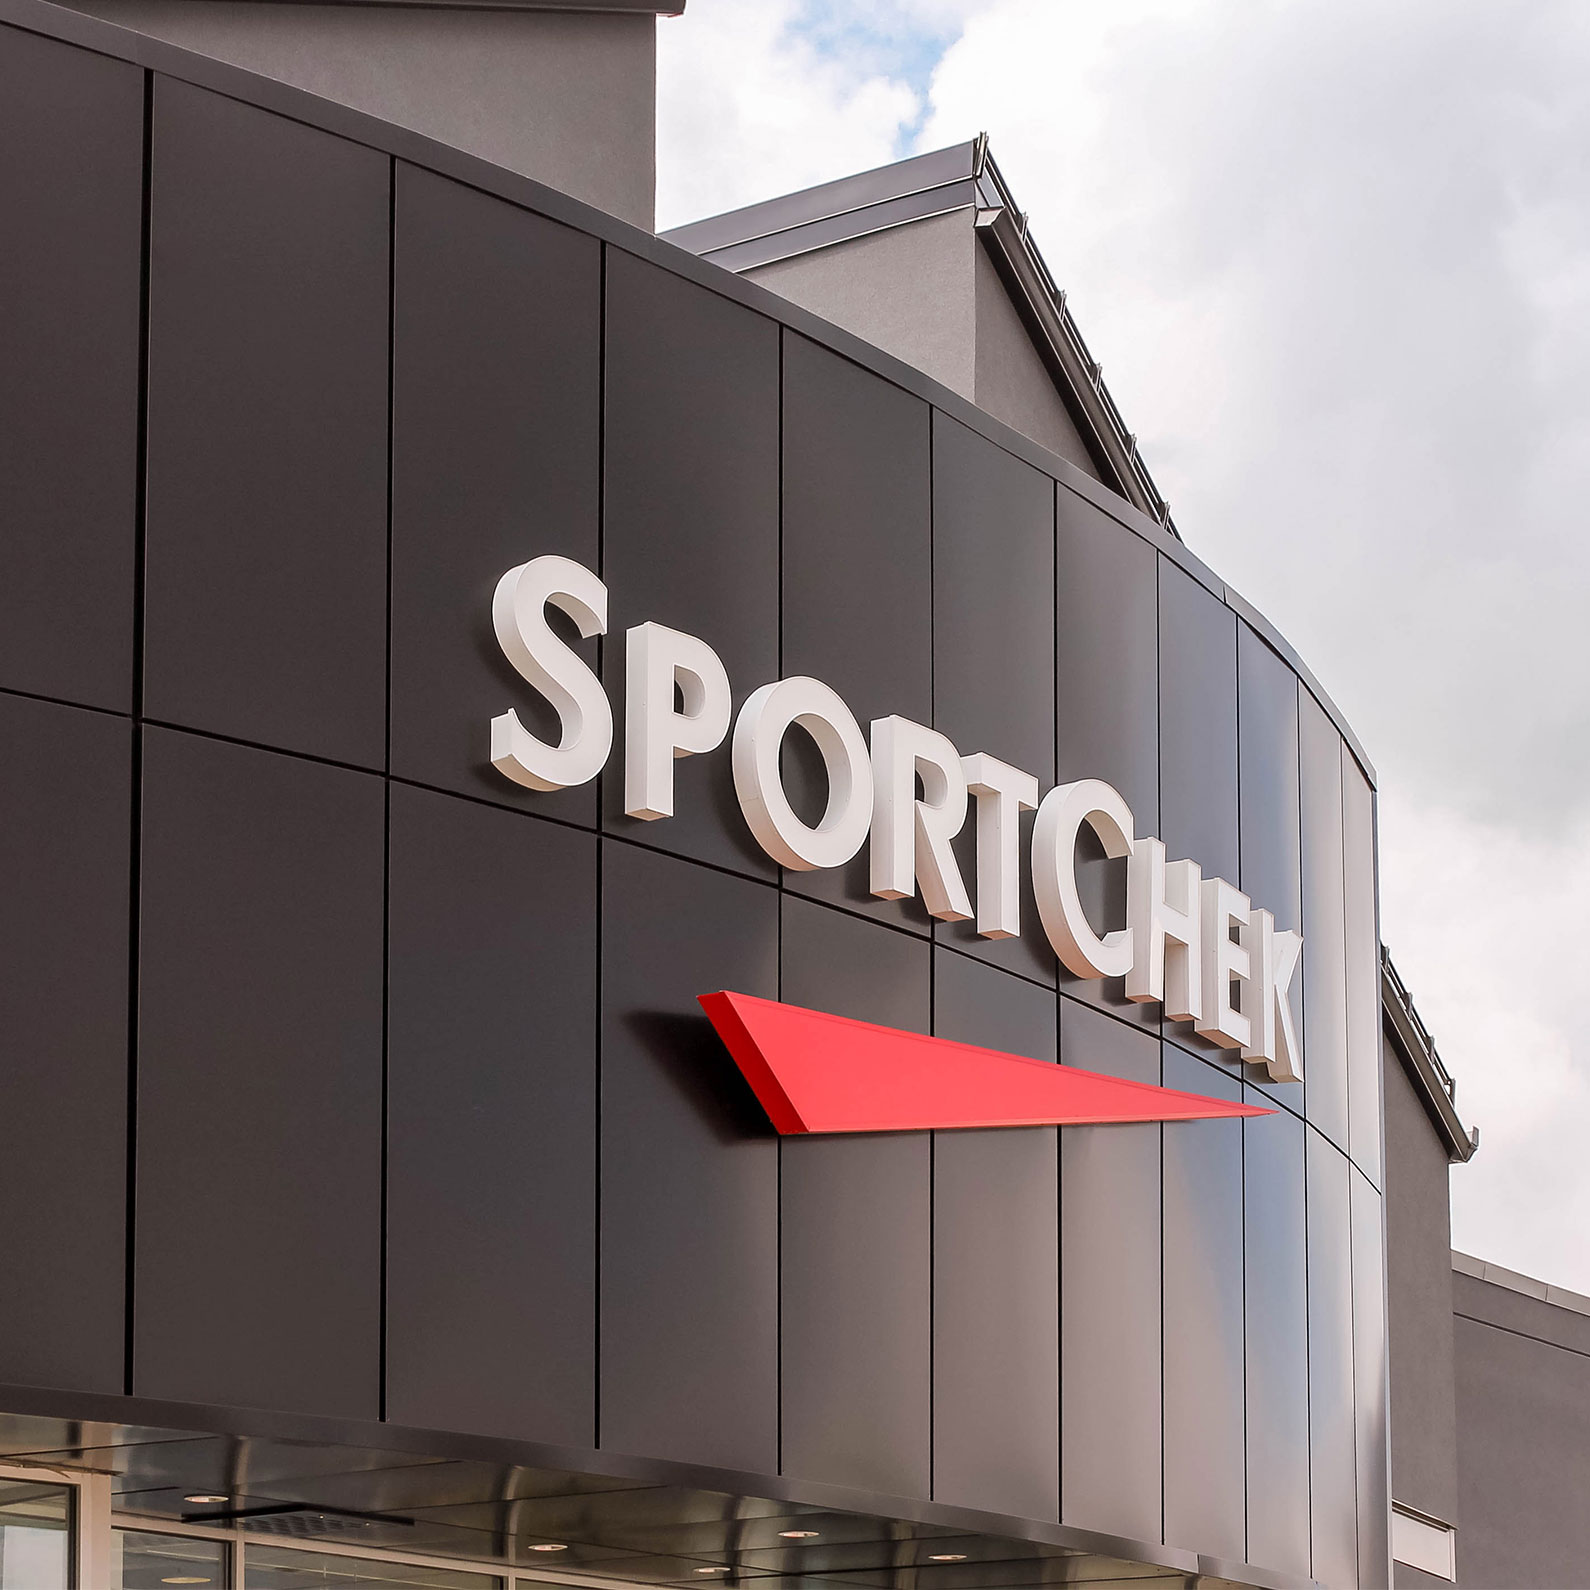 Sporting Goods Store Cladding